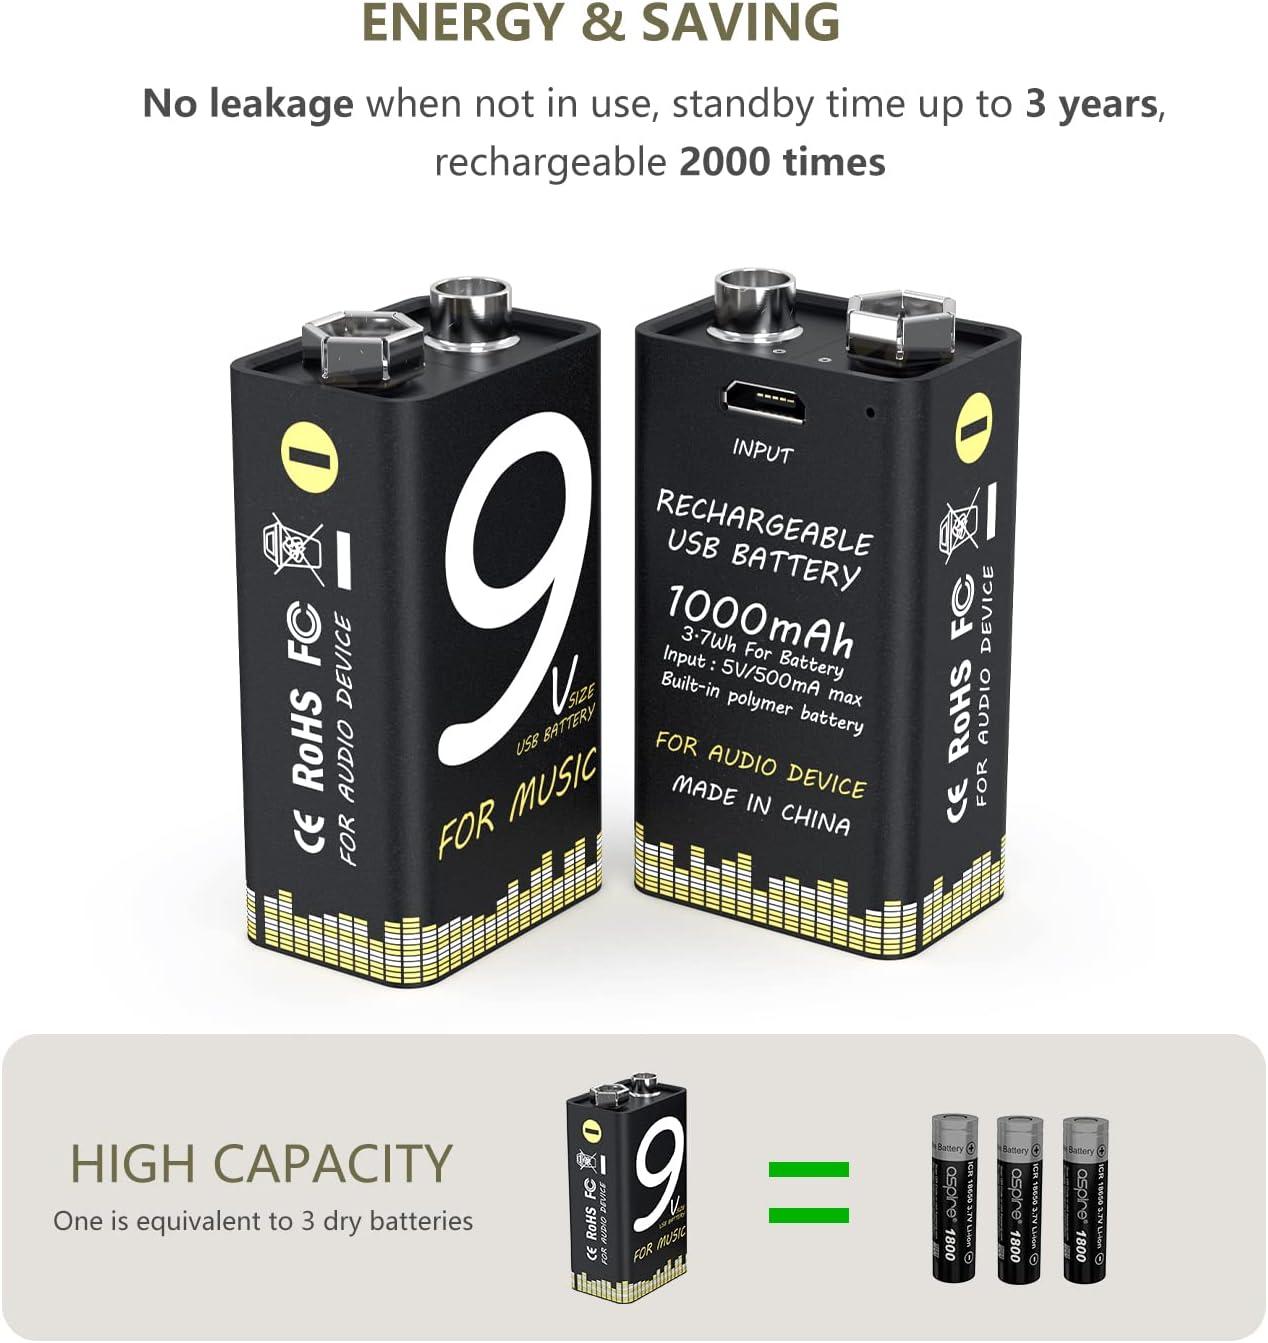 9V Battery,USB Rechargeable 9Volt Lithium Batteries 1000mAh,Long Lasting LI-ion  Batteries, No Memory Effect-with Micro Charging Cable,for Smoke A  larms,Electric Guitar,for Any Need Devices9V Battery